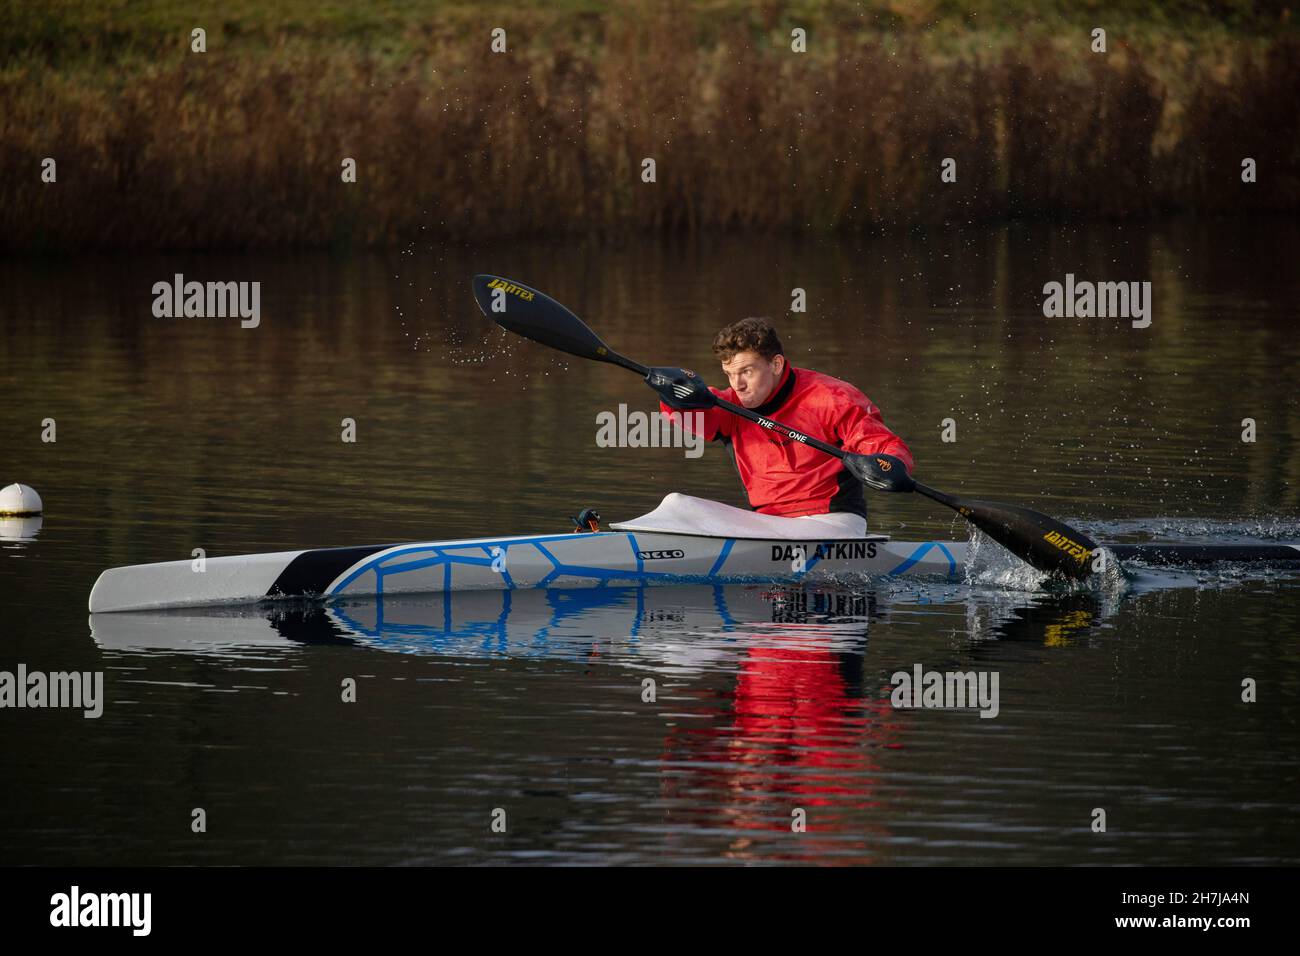 British sprint canoeist Dan Atkins during a morning training session at Dorney Lake on the 4th February 2021 in Buckinghamshire in the United Kingdom. Stock Photo